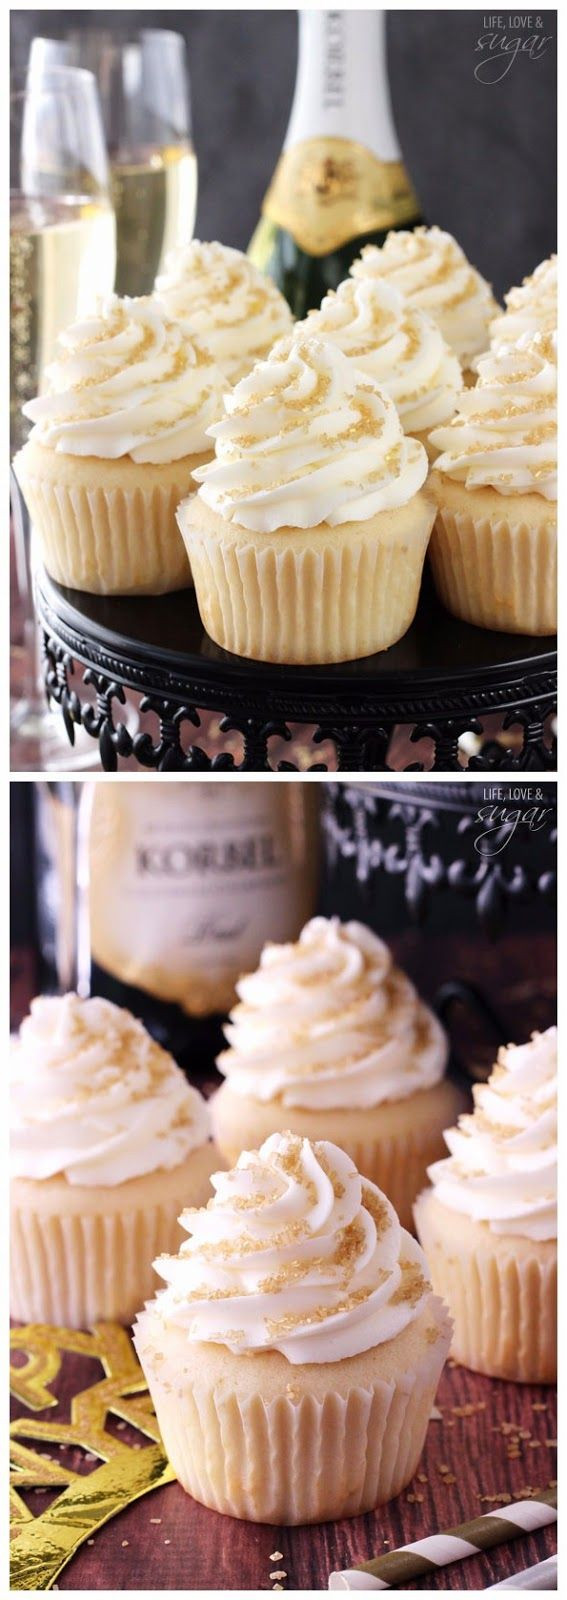 Cupcake Ideas For Engagement Party
 25 best ideas about Engagement party cupcakes on